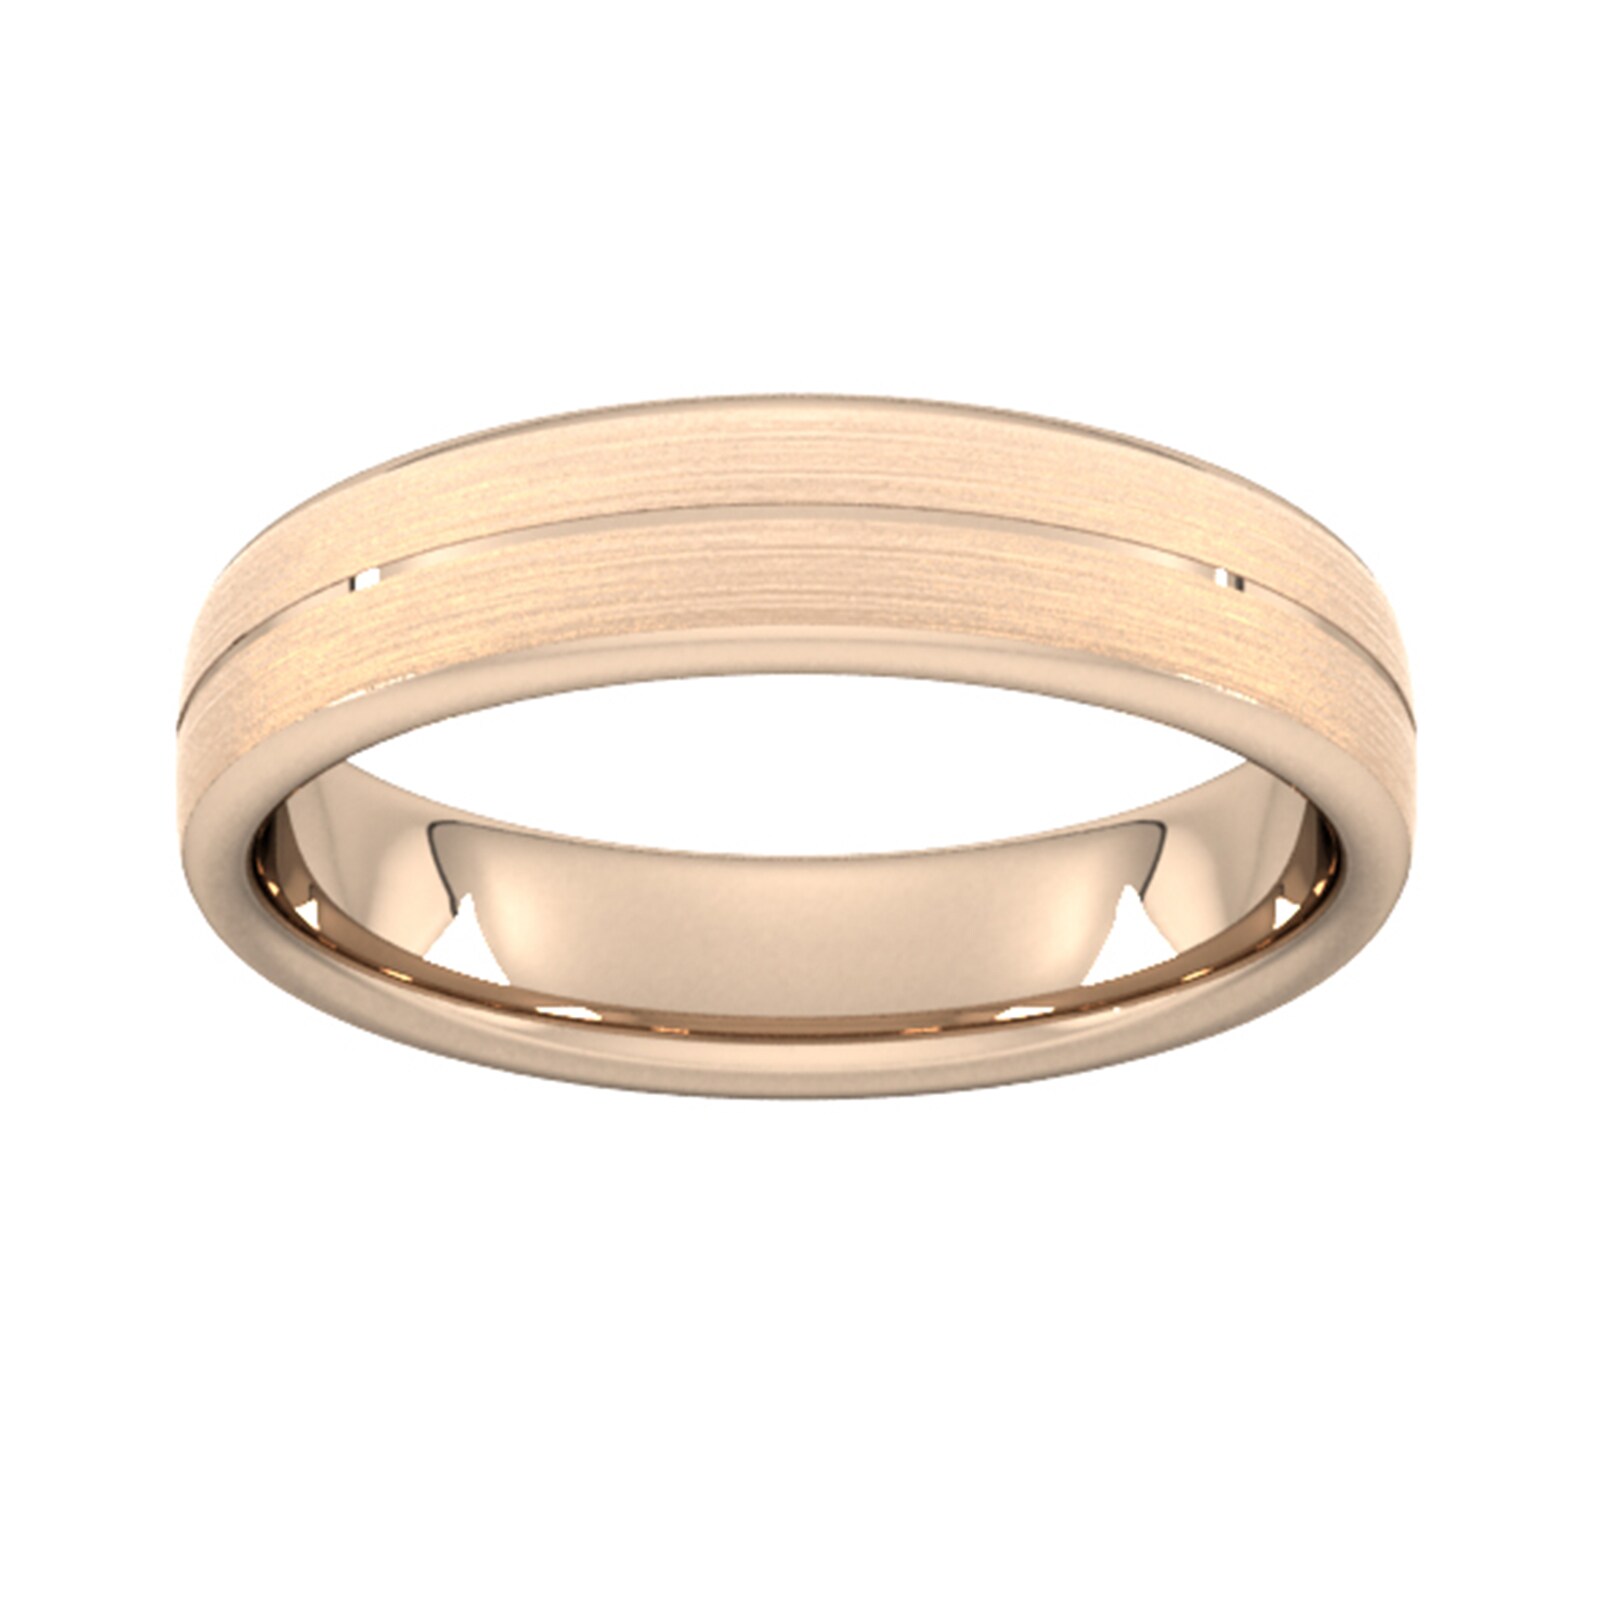 5mm D Shape Standard Centre Groove With Chamfered Edge Wedding Ring In 18 Carat Rose Gold - Ring Size V